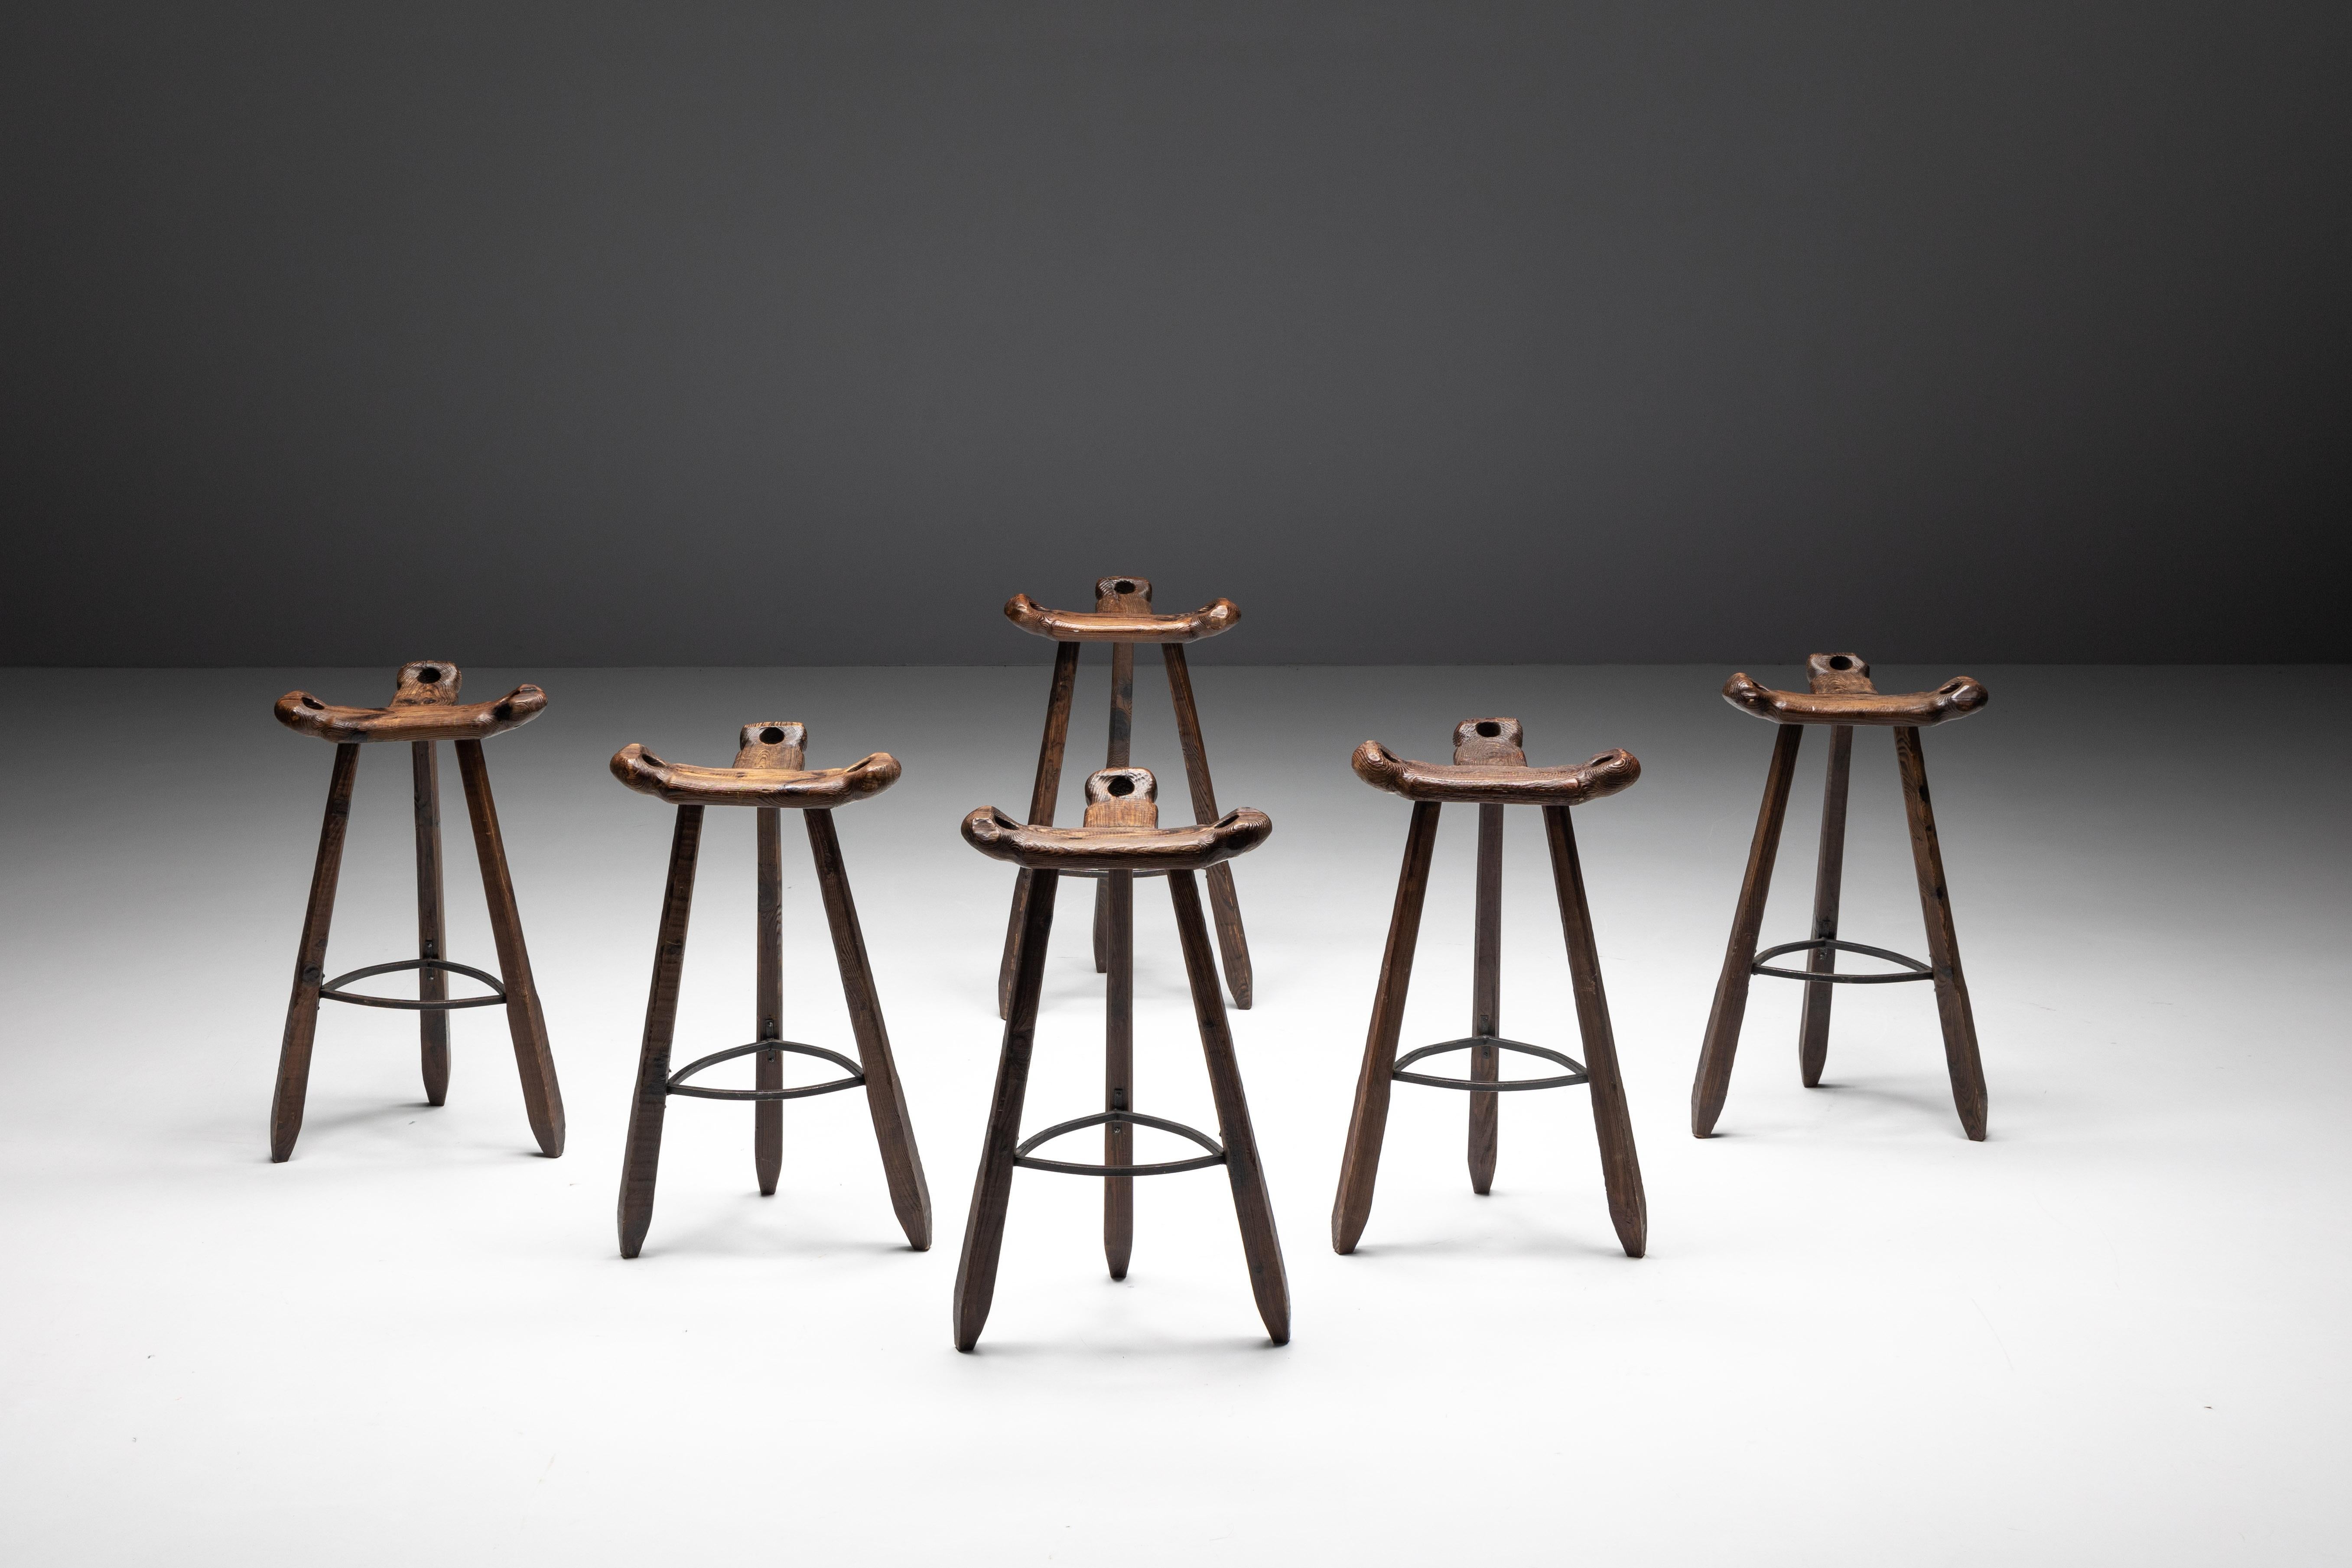 Spanish oak tripod bar stools designed with the distinctive influence of Brazilian designer Sergio Rodrigues. These stools feature ergonomic curved T-shaped seats with handles on all sides and three sturdy tapered legs equipped with a forged steel